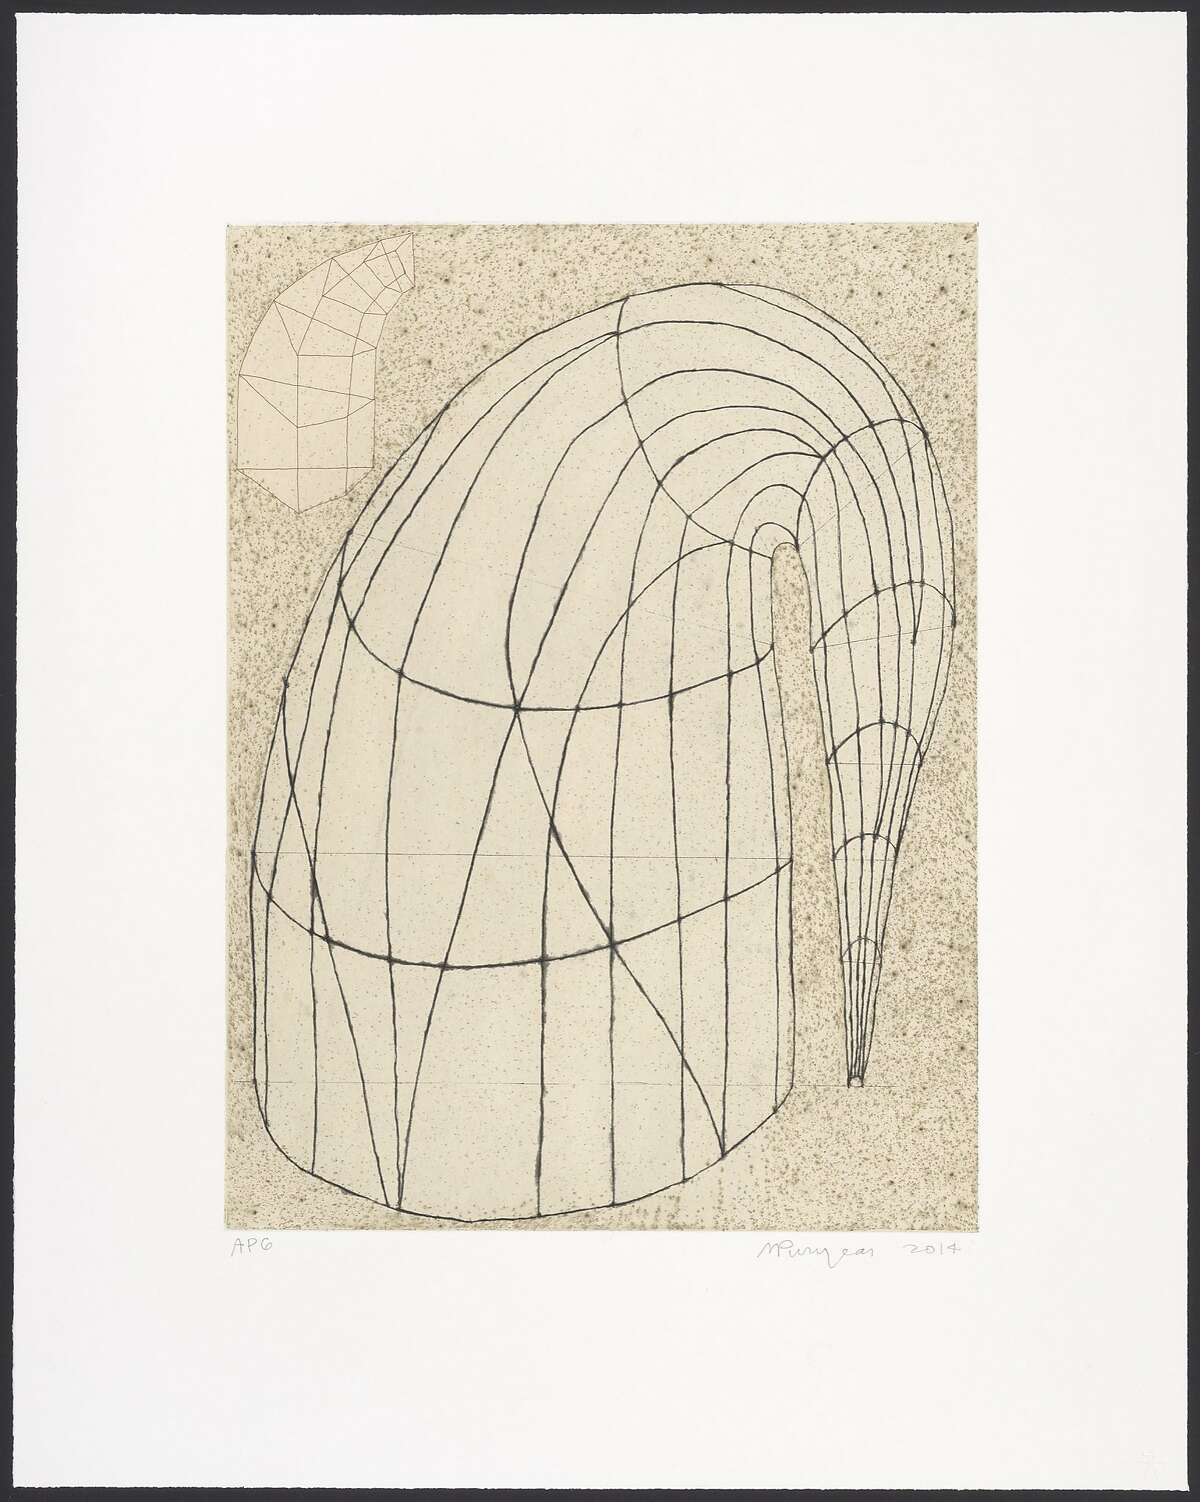 Martin Puryear, "Untitled (State II, 2014)," 2014. Color soft-ground etching and drypoint on chine coll�, 35 x 28 in.